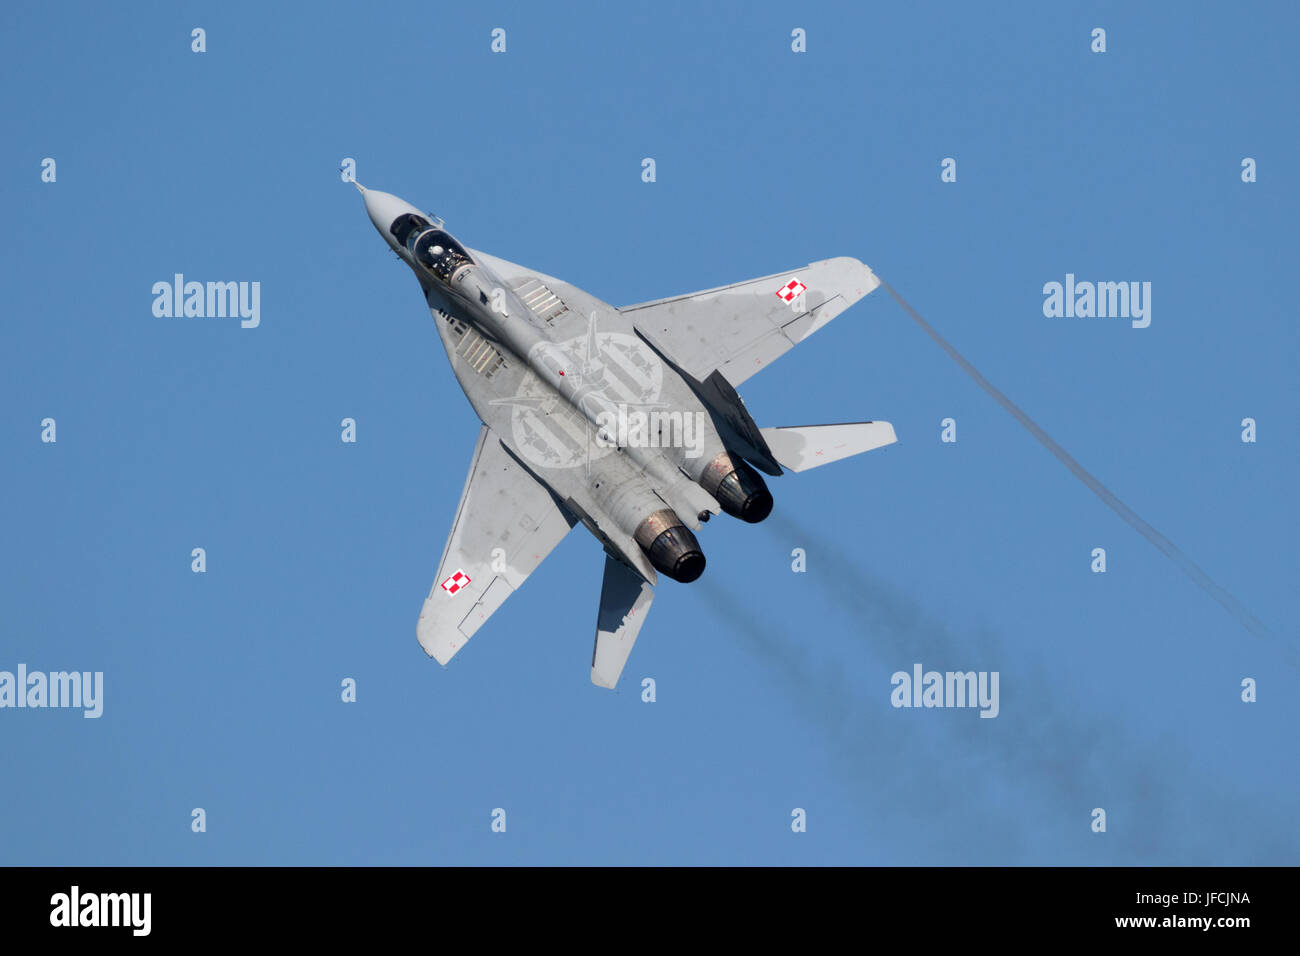 FLORENNES, BELGIUM - JUN 15, 2017: Polish Air Force MiG-29 Fulcrum fighter jet flying over the Florennes Airbase. Stock Photo